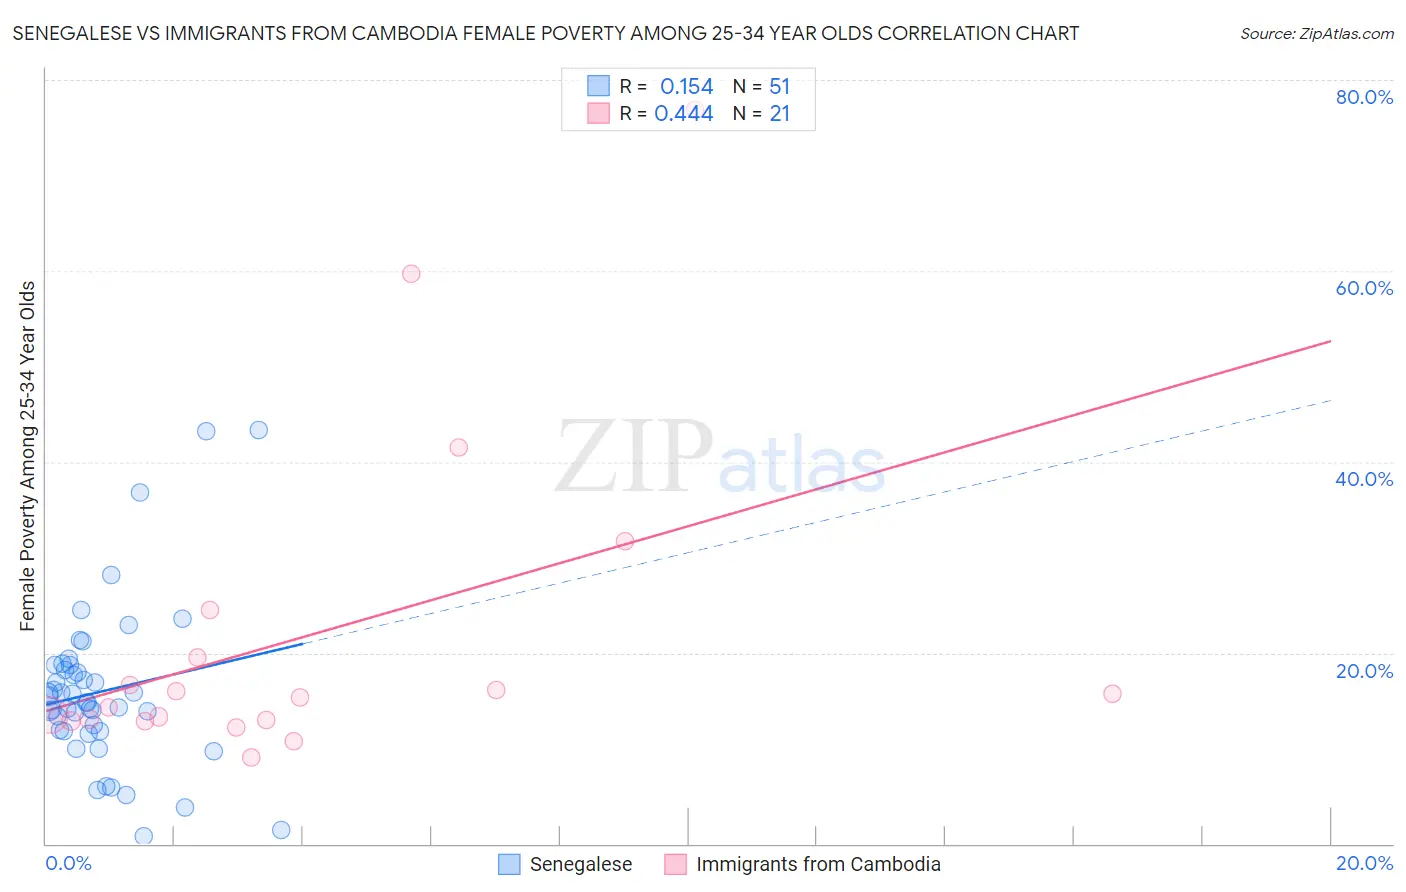 Senegalese vs Immigrants from Cambodia Female Poverty Among 25-34 Year Olds